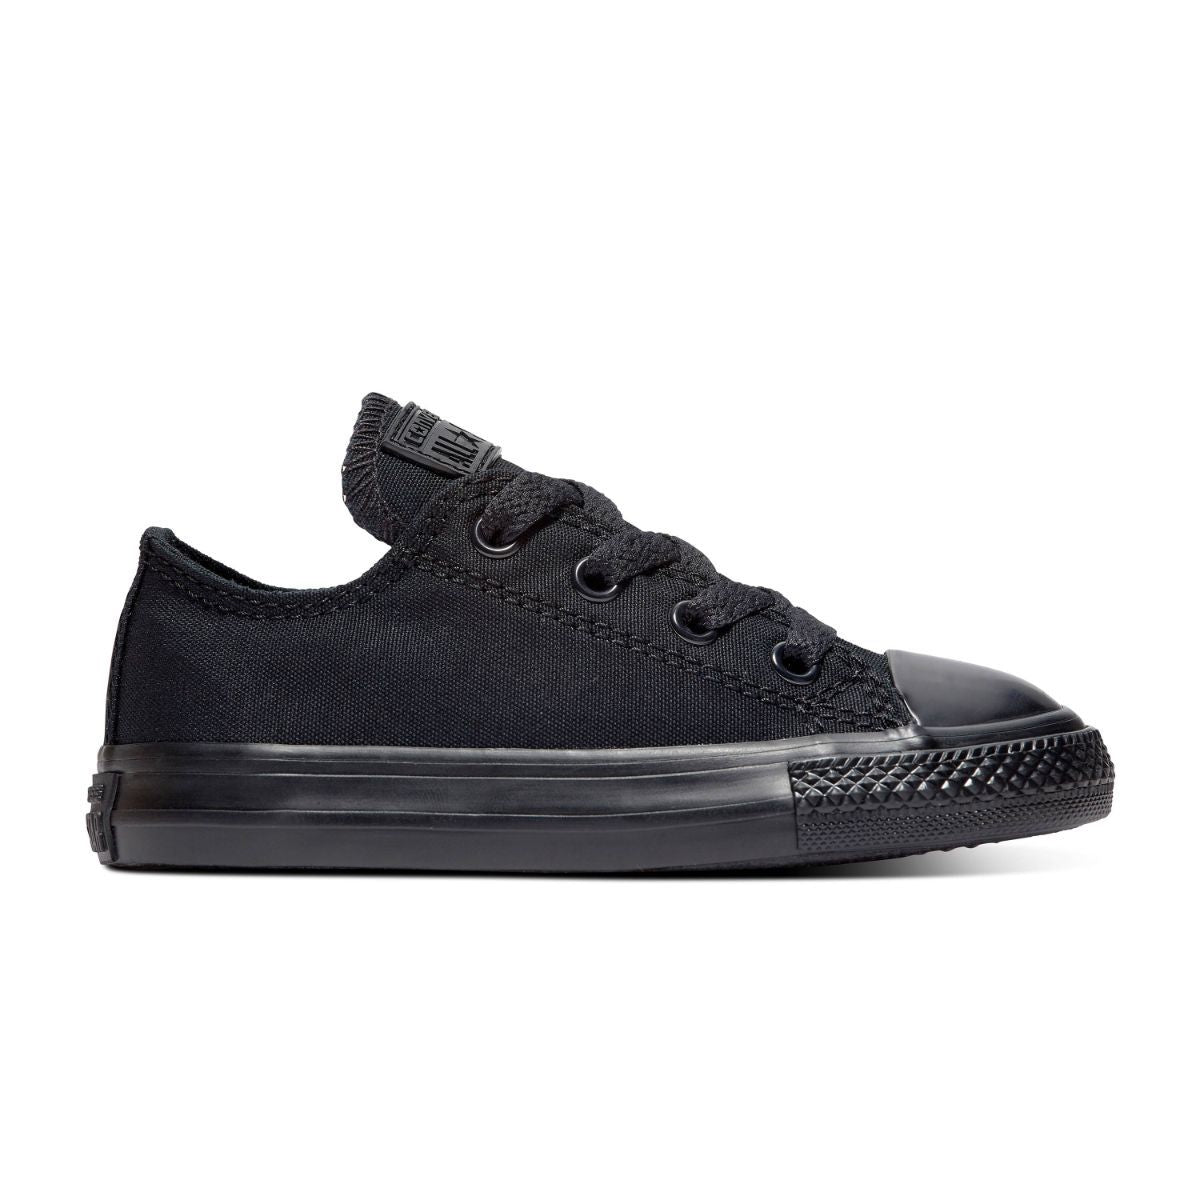 Converse Toddler Chuck Taylor All Star Black Low Top